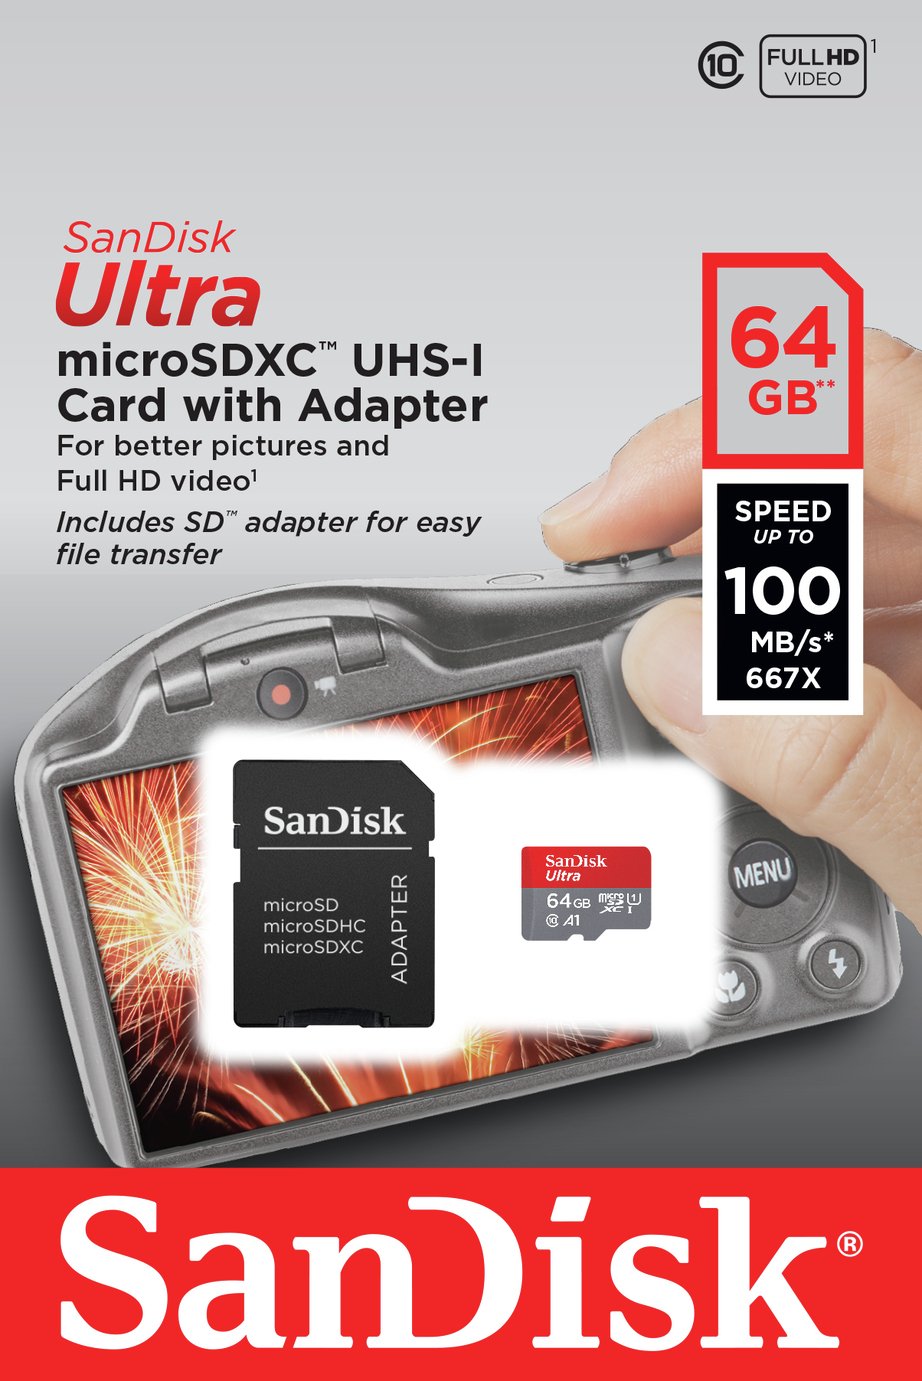 SanDisk Ultra 100MBs Micro SDXC Memory Card Review